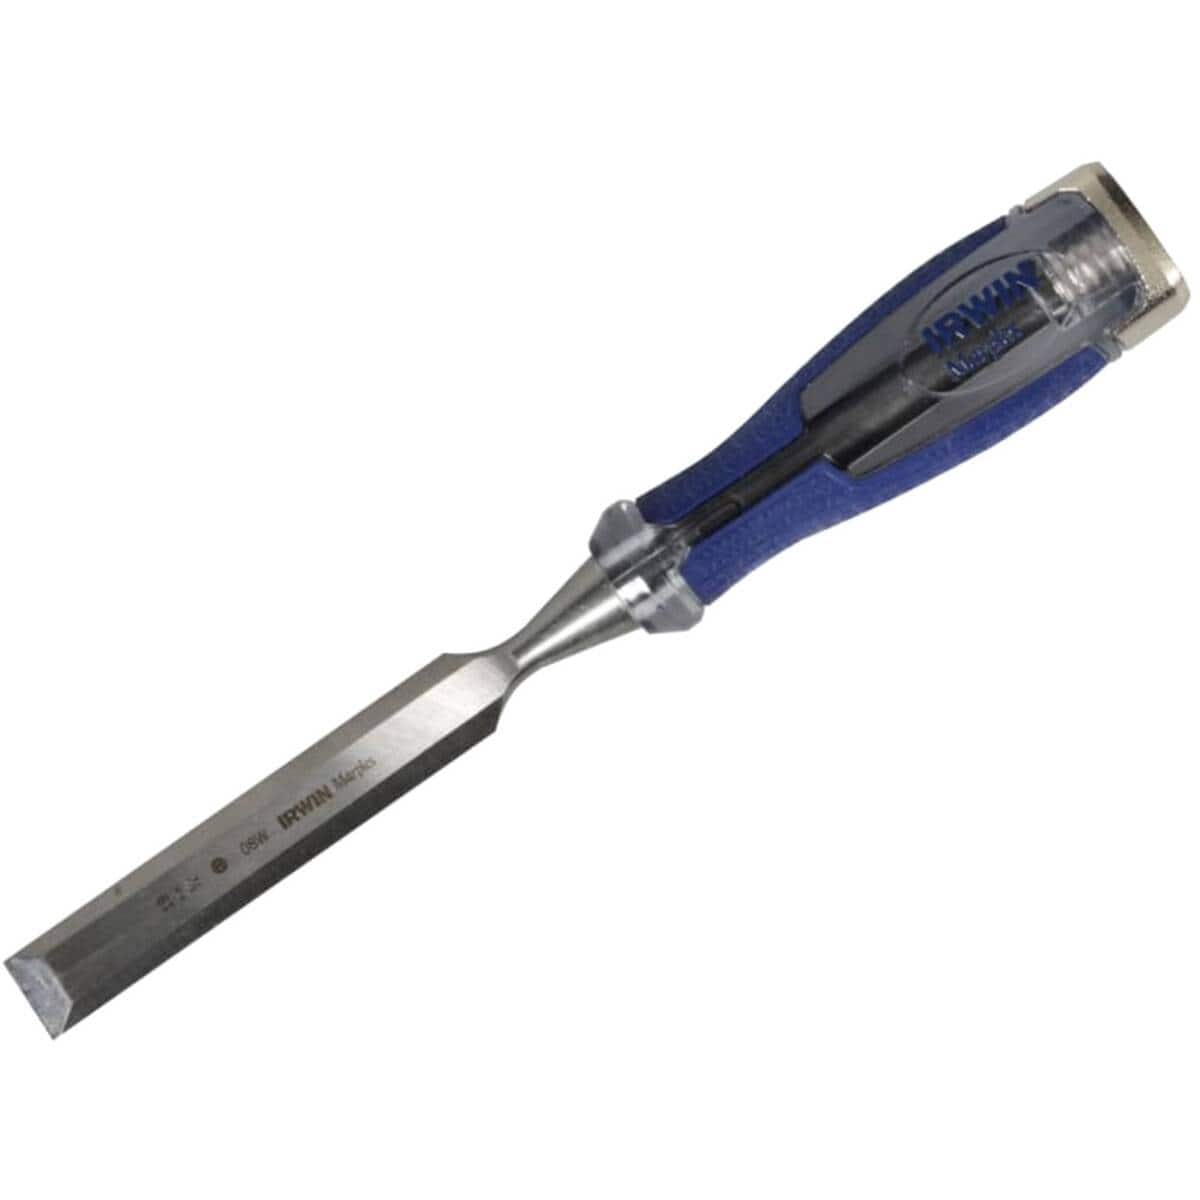 Irwin Marple M444 Bevel Edge Chisel - 6mm, 10mm, 13mm, 16mm, 19mm, 25mm, 32mm & 38mm | Supply Master Accra, Ghana Chisels Files Planes & Punches Buy Tools hardware Building materials